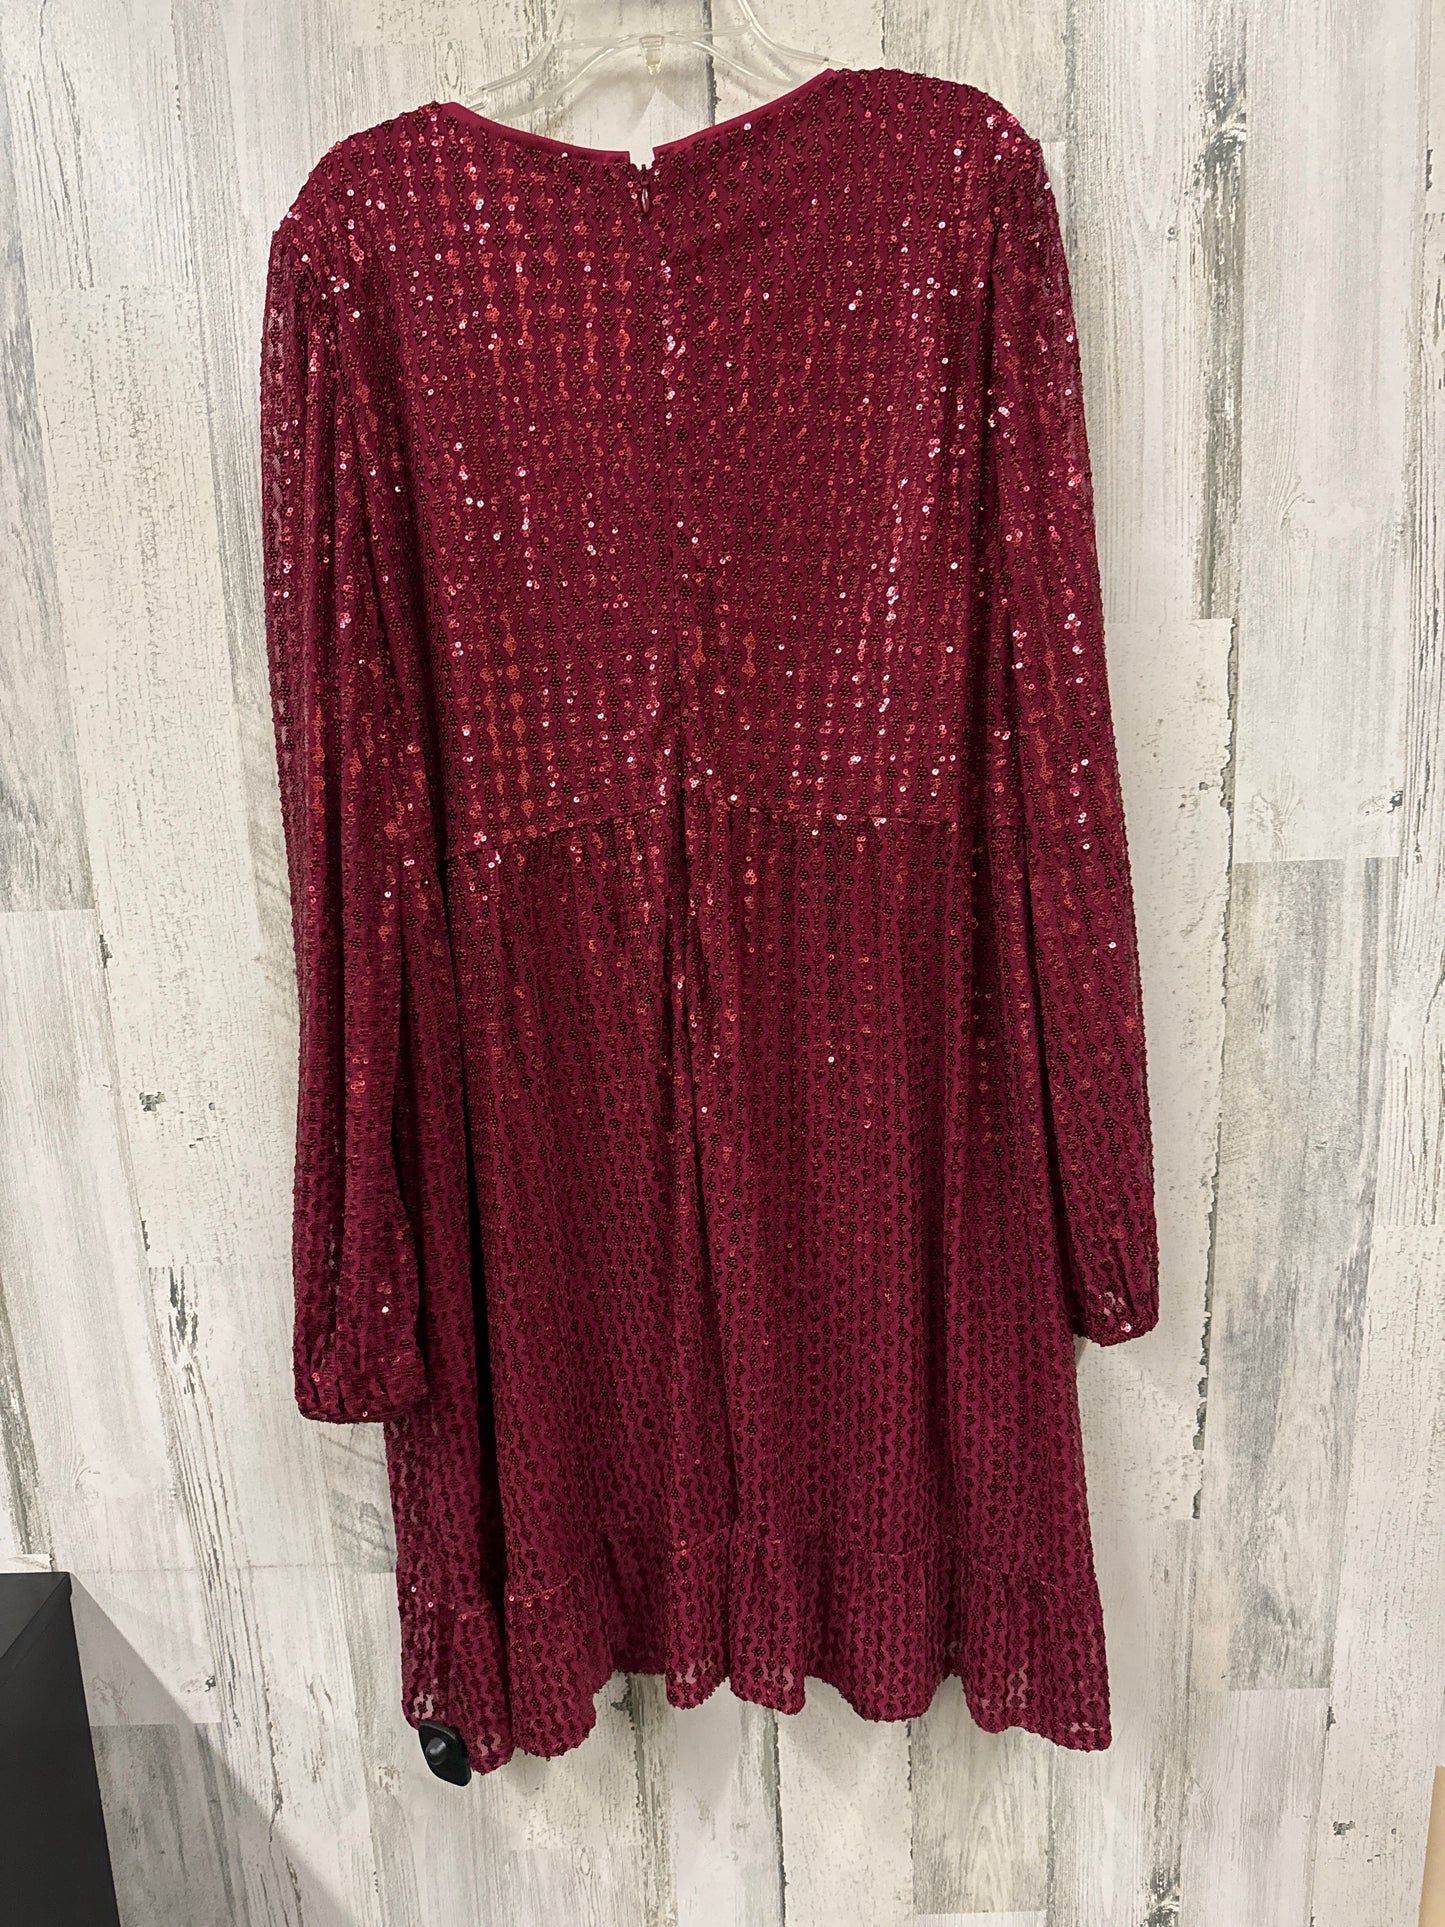 Red Dress Party Midi Clothes Mentor, Size 3x